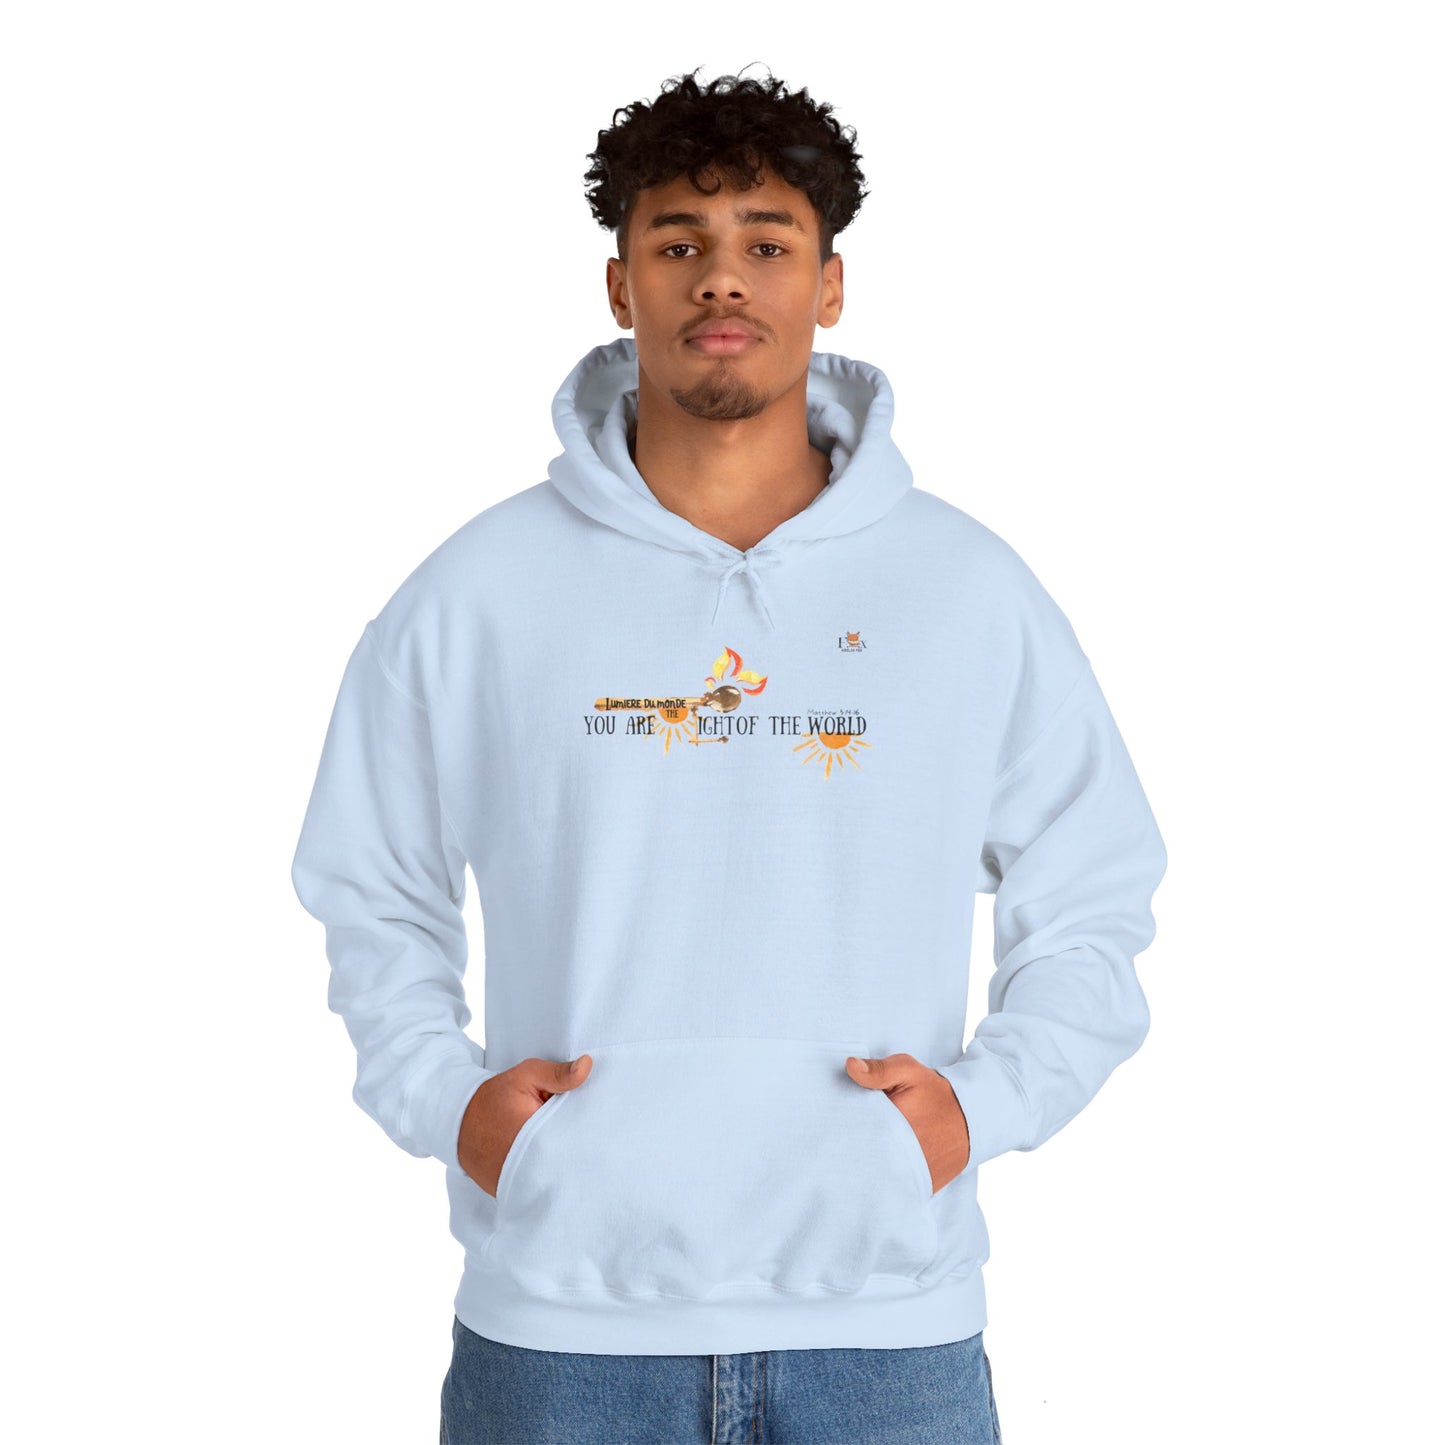 You are the light of the world [matches]-  Hoodie Sweatshirt